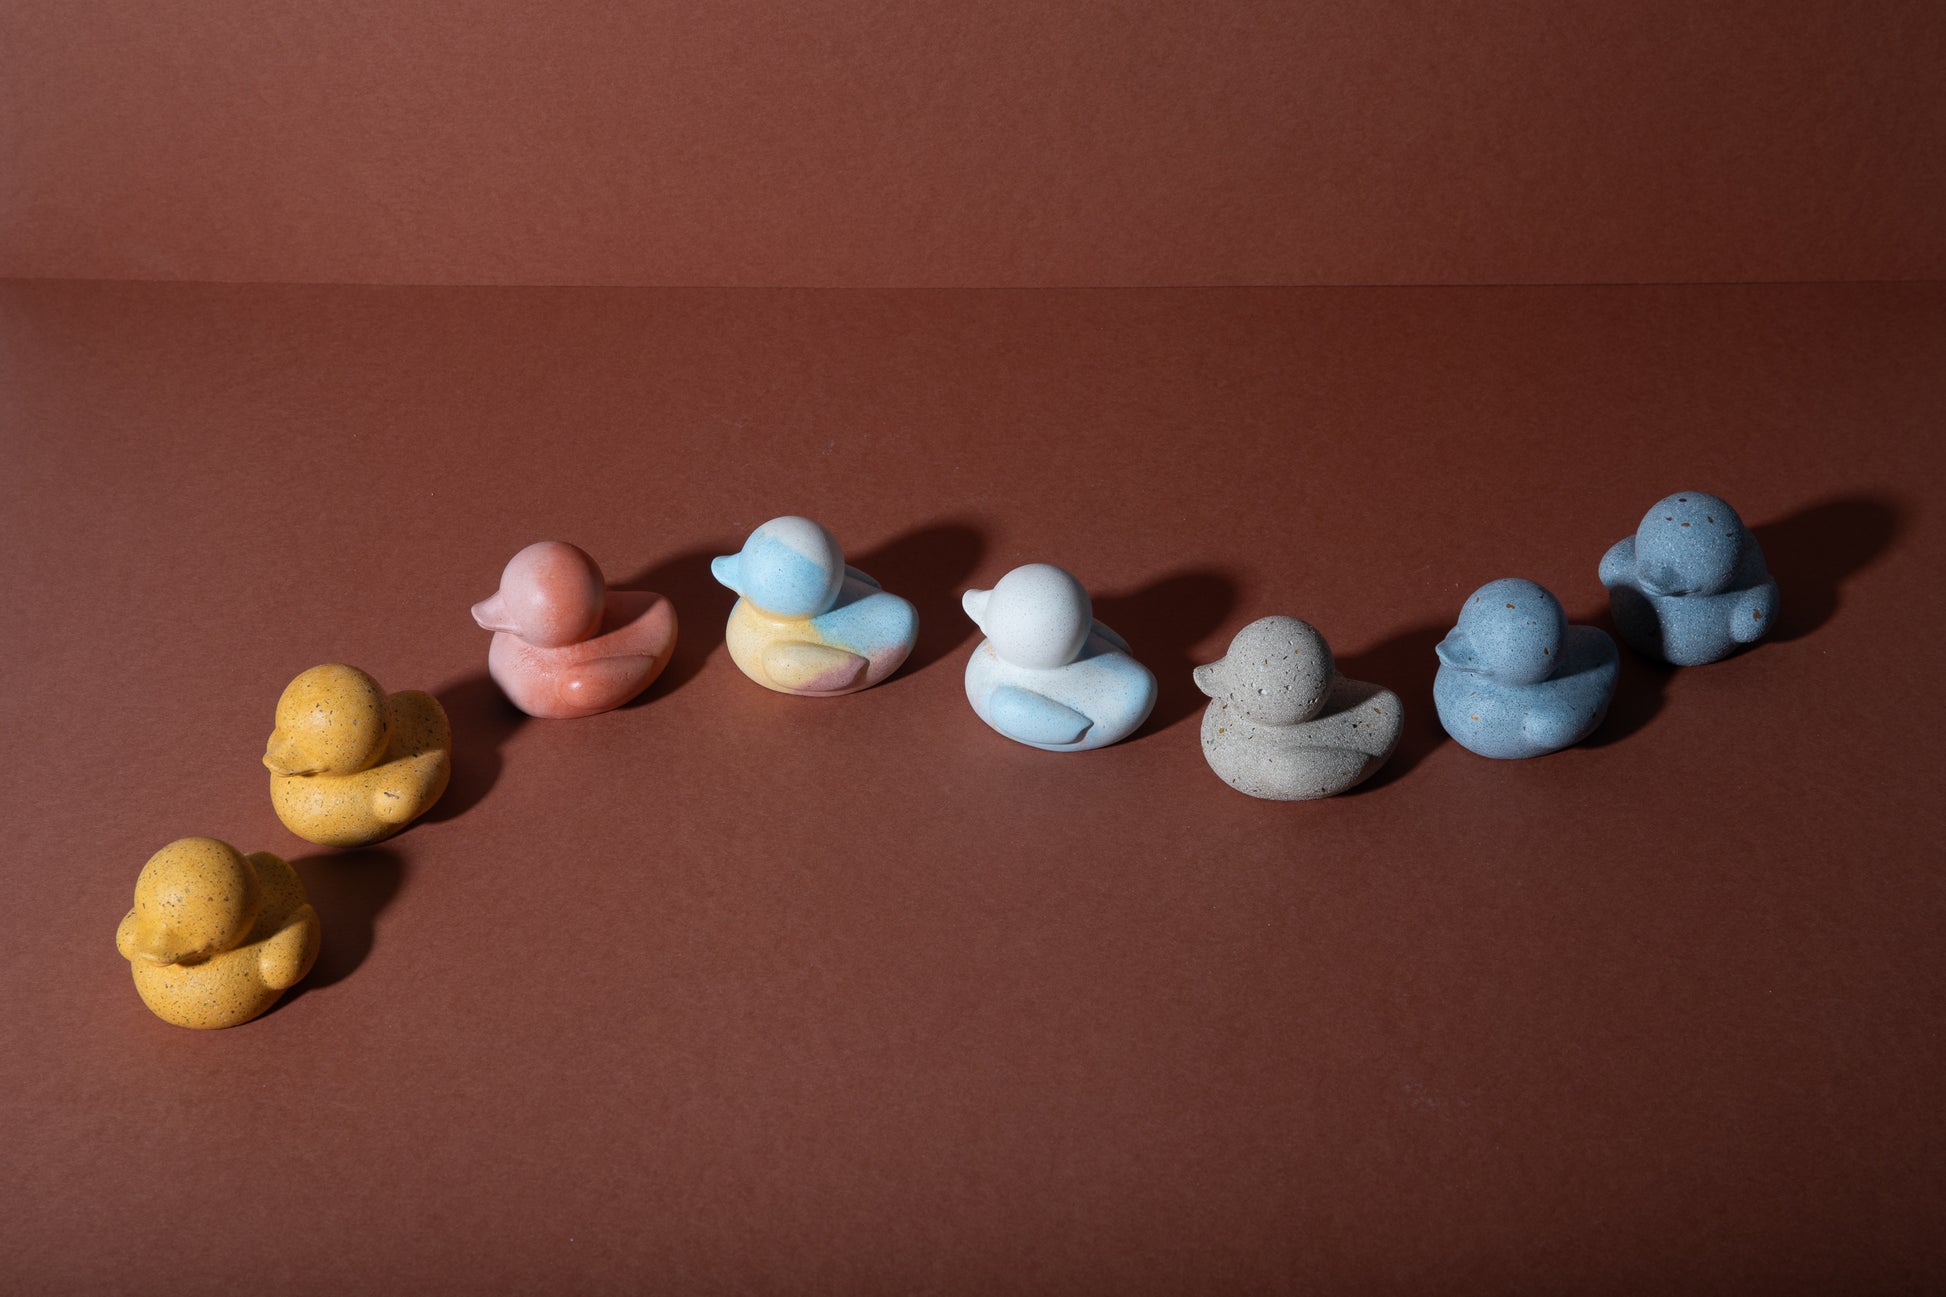 mini "rubber" duckies in multiple colors